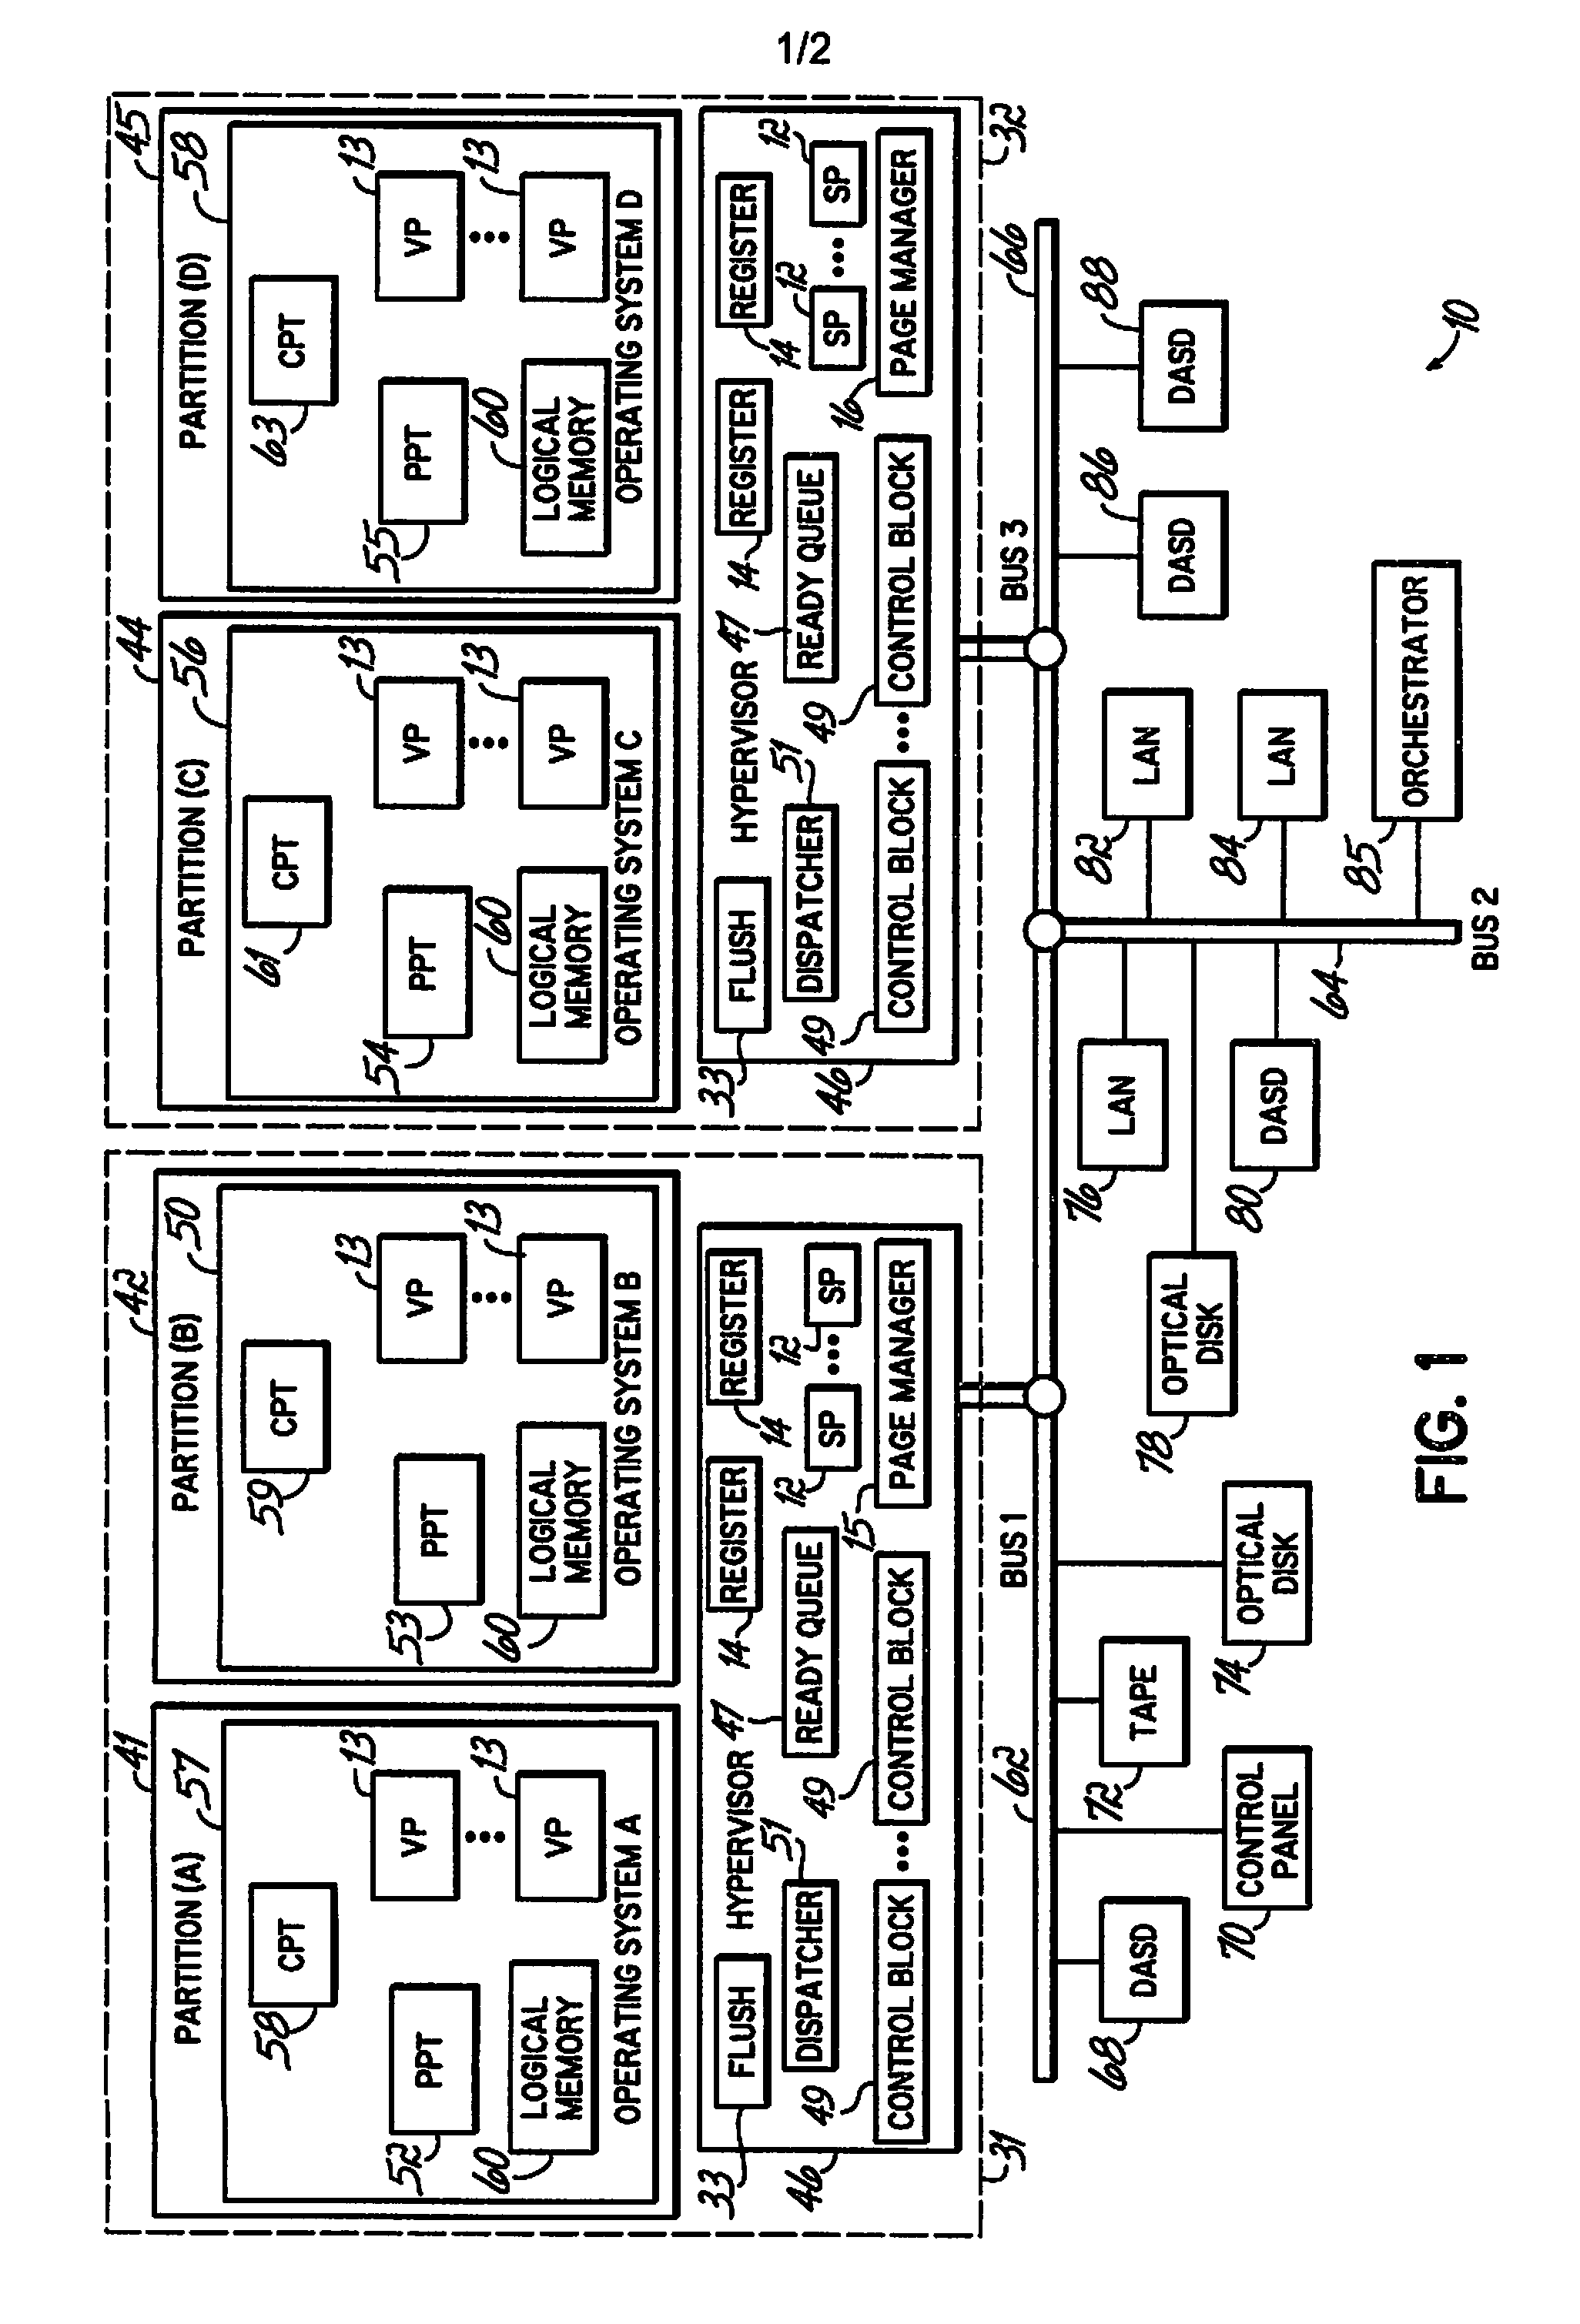 System and Method for Maintaining Page Tables Used During a Logical Partition Migration